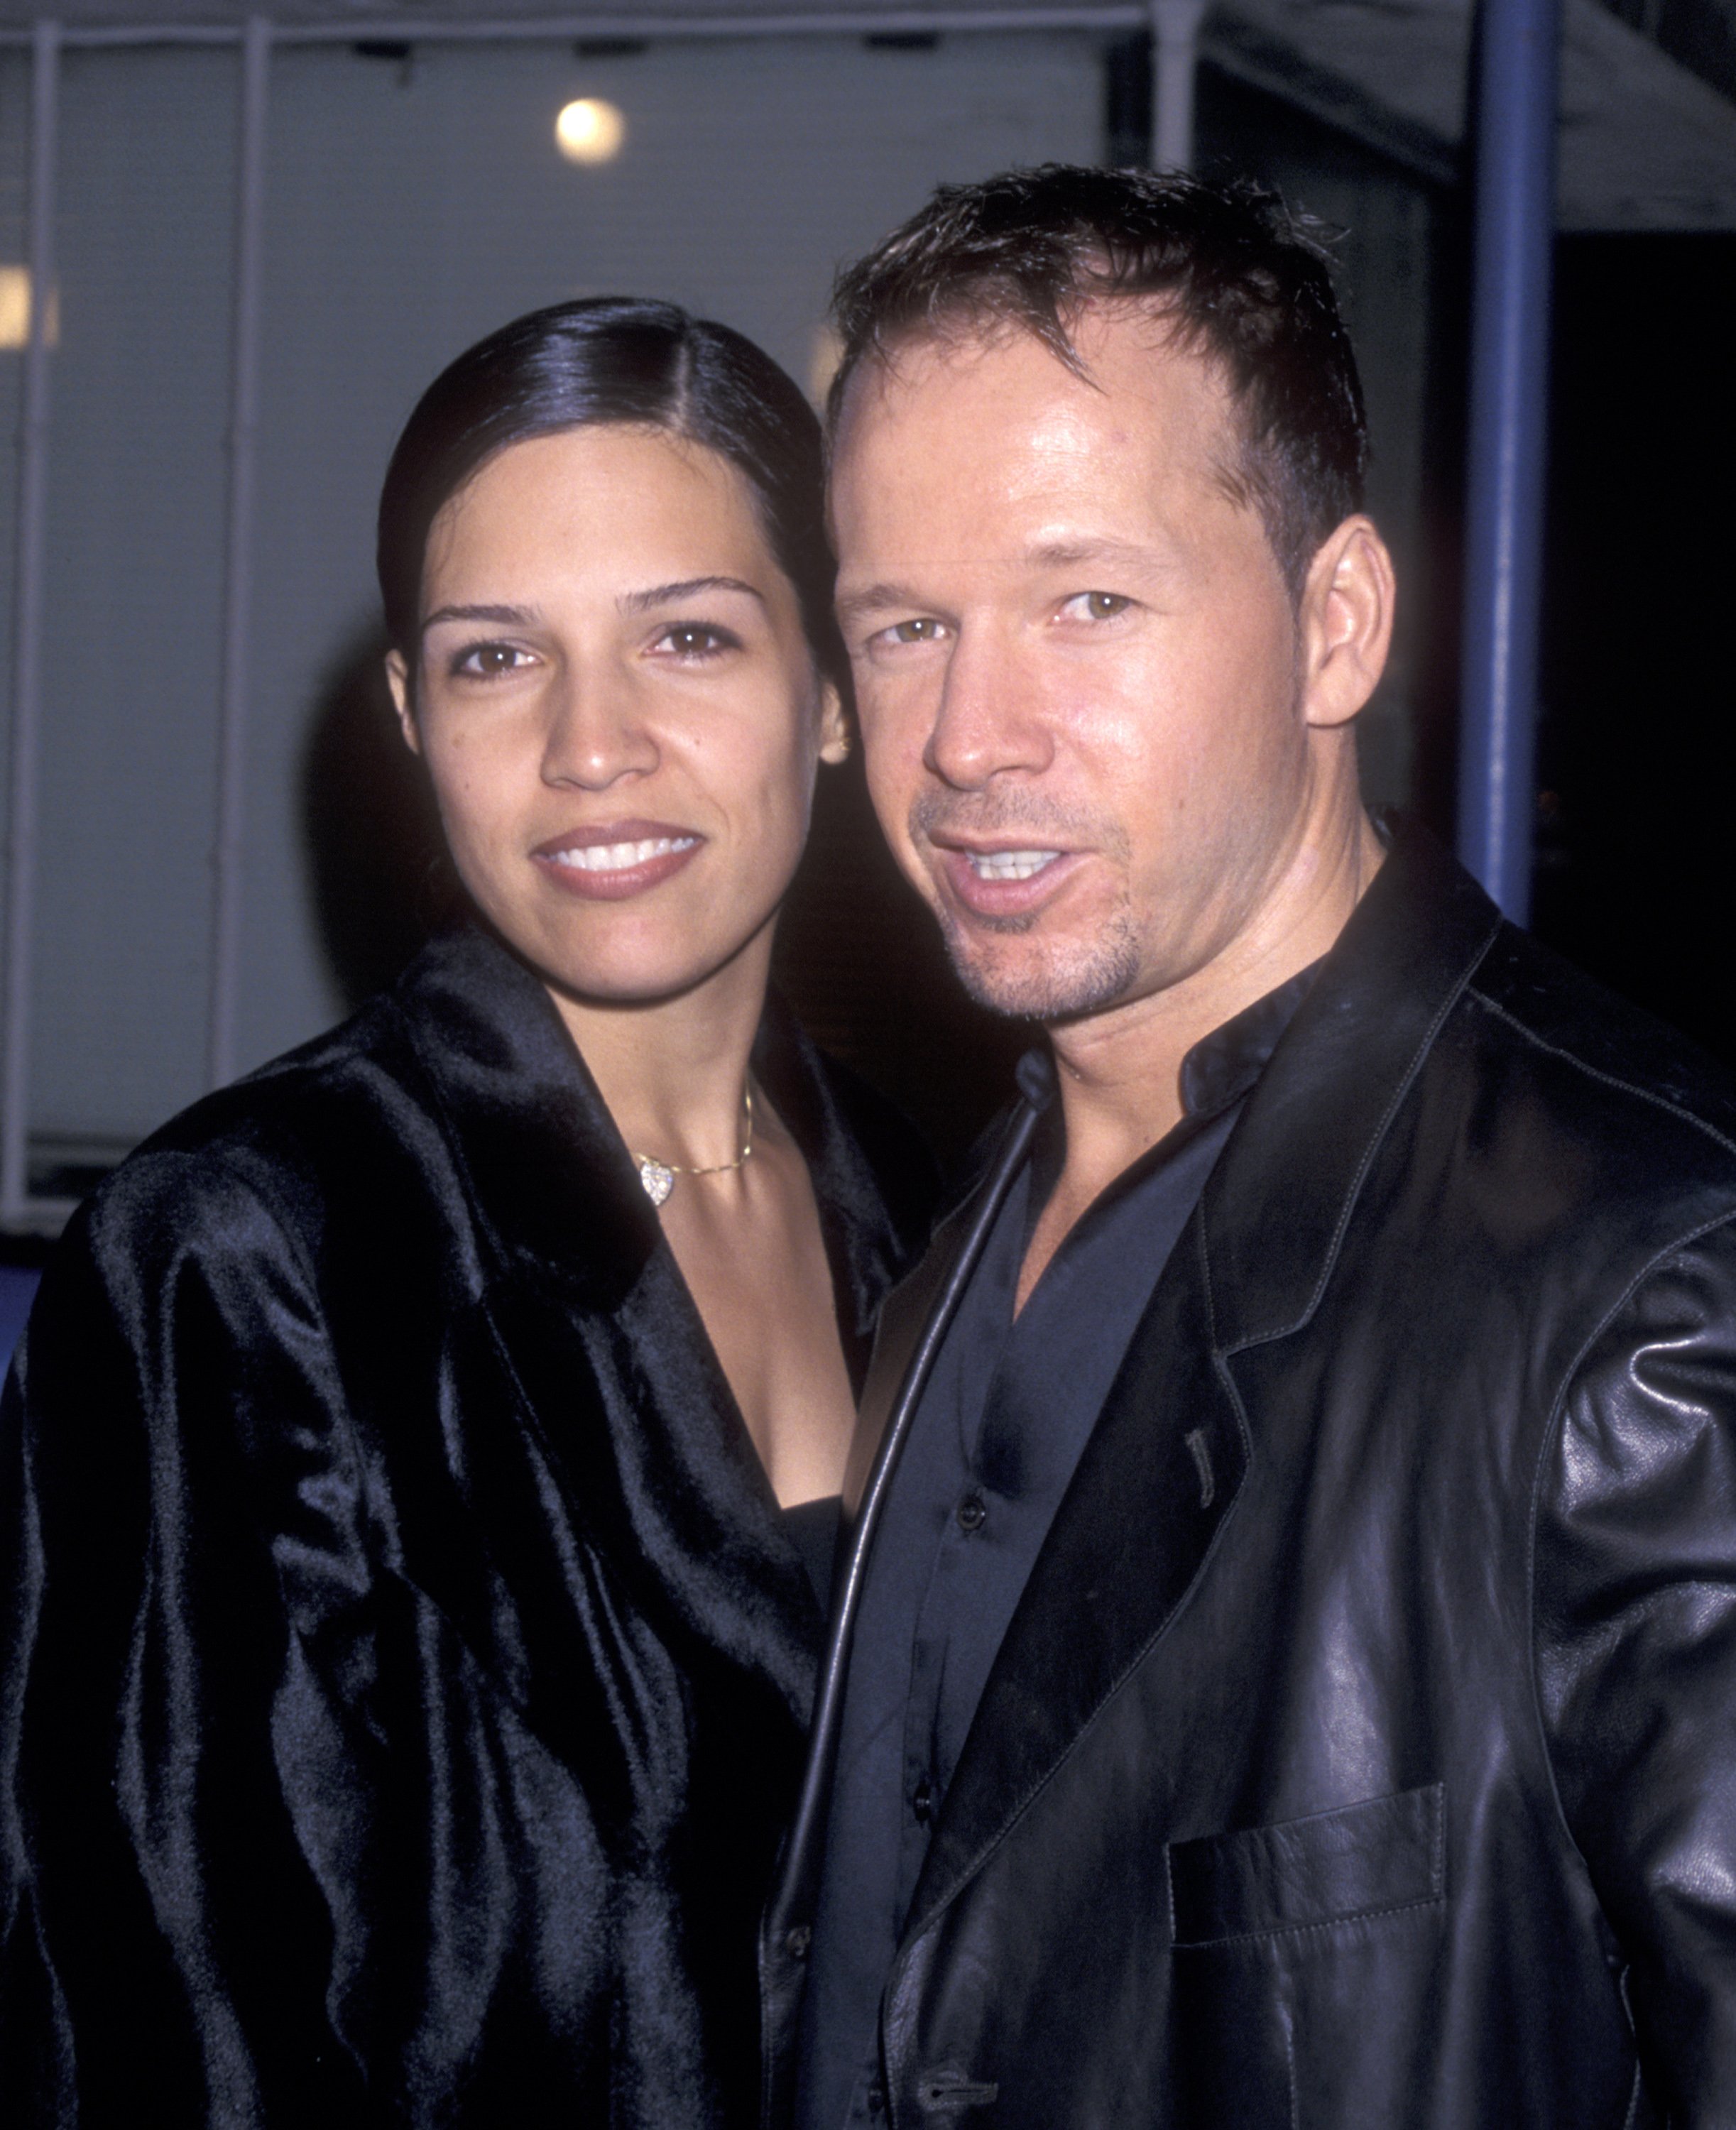 Donnie Wahlberg and Kimberly Fey attend the "Three Kings" Westwood Premiere on September 27, 1999, at Mann Village Theatre in Westwood, California. | Source: Getty Images